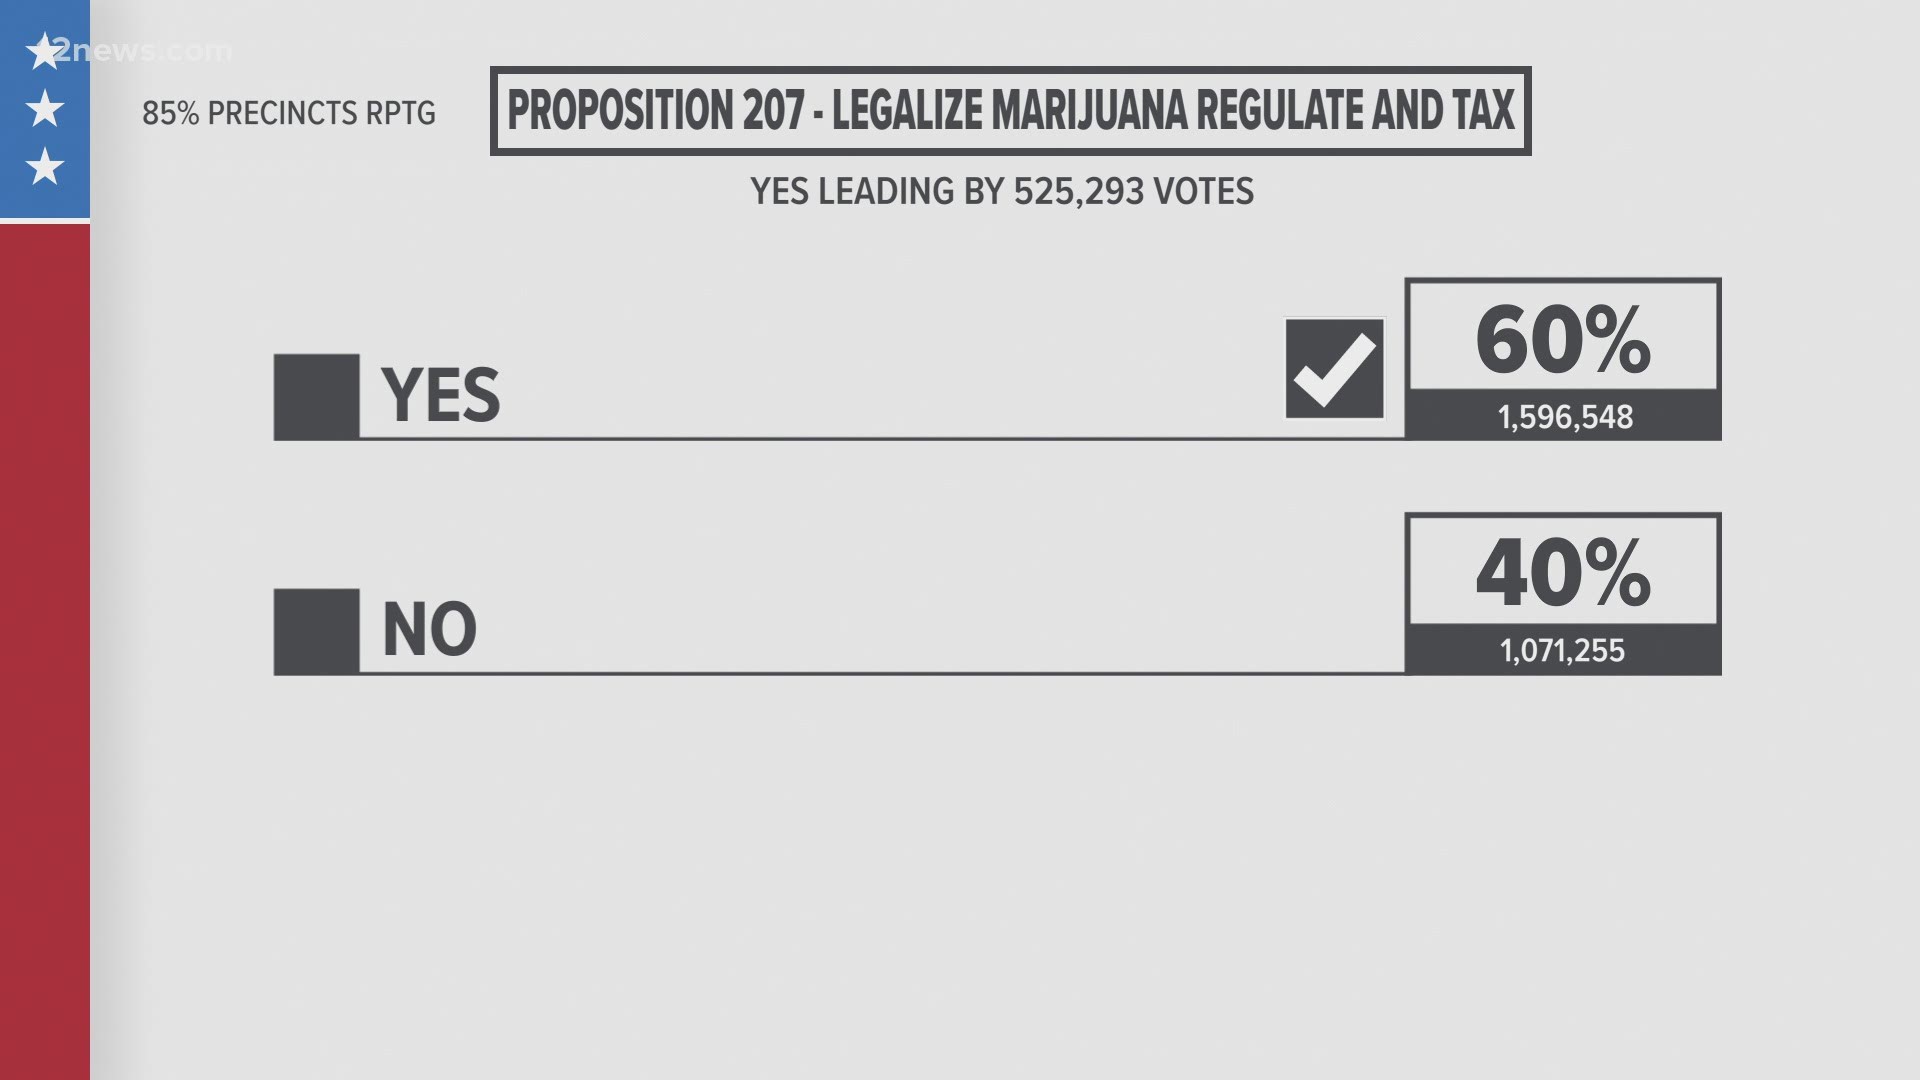 Here are the latest updates on propositions 207 and 208 in Arizona. Matt Yurus has the details.